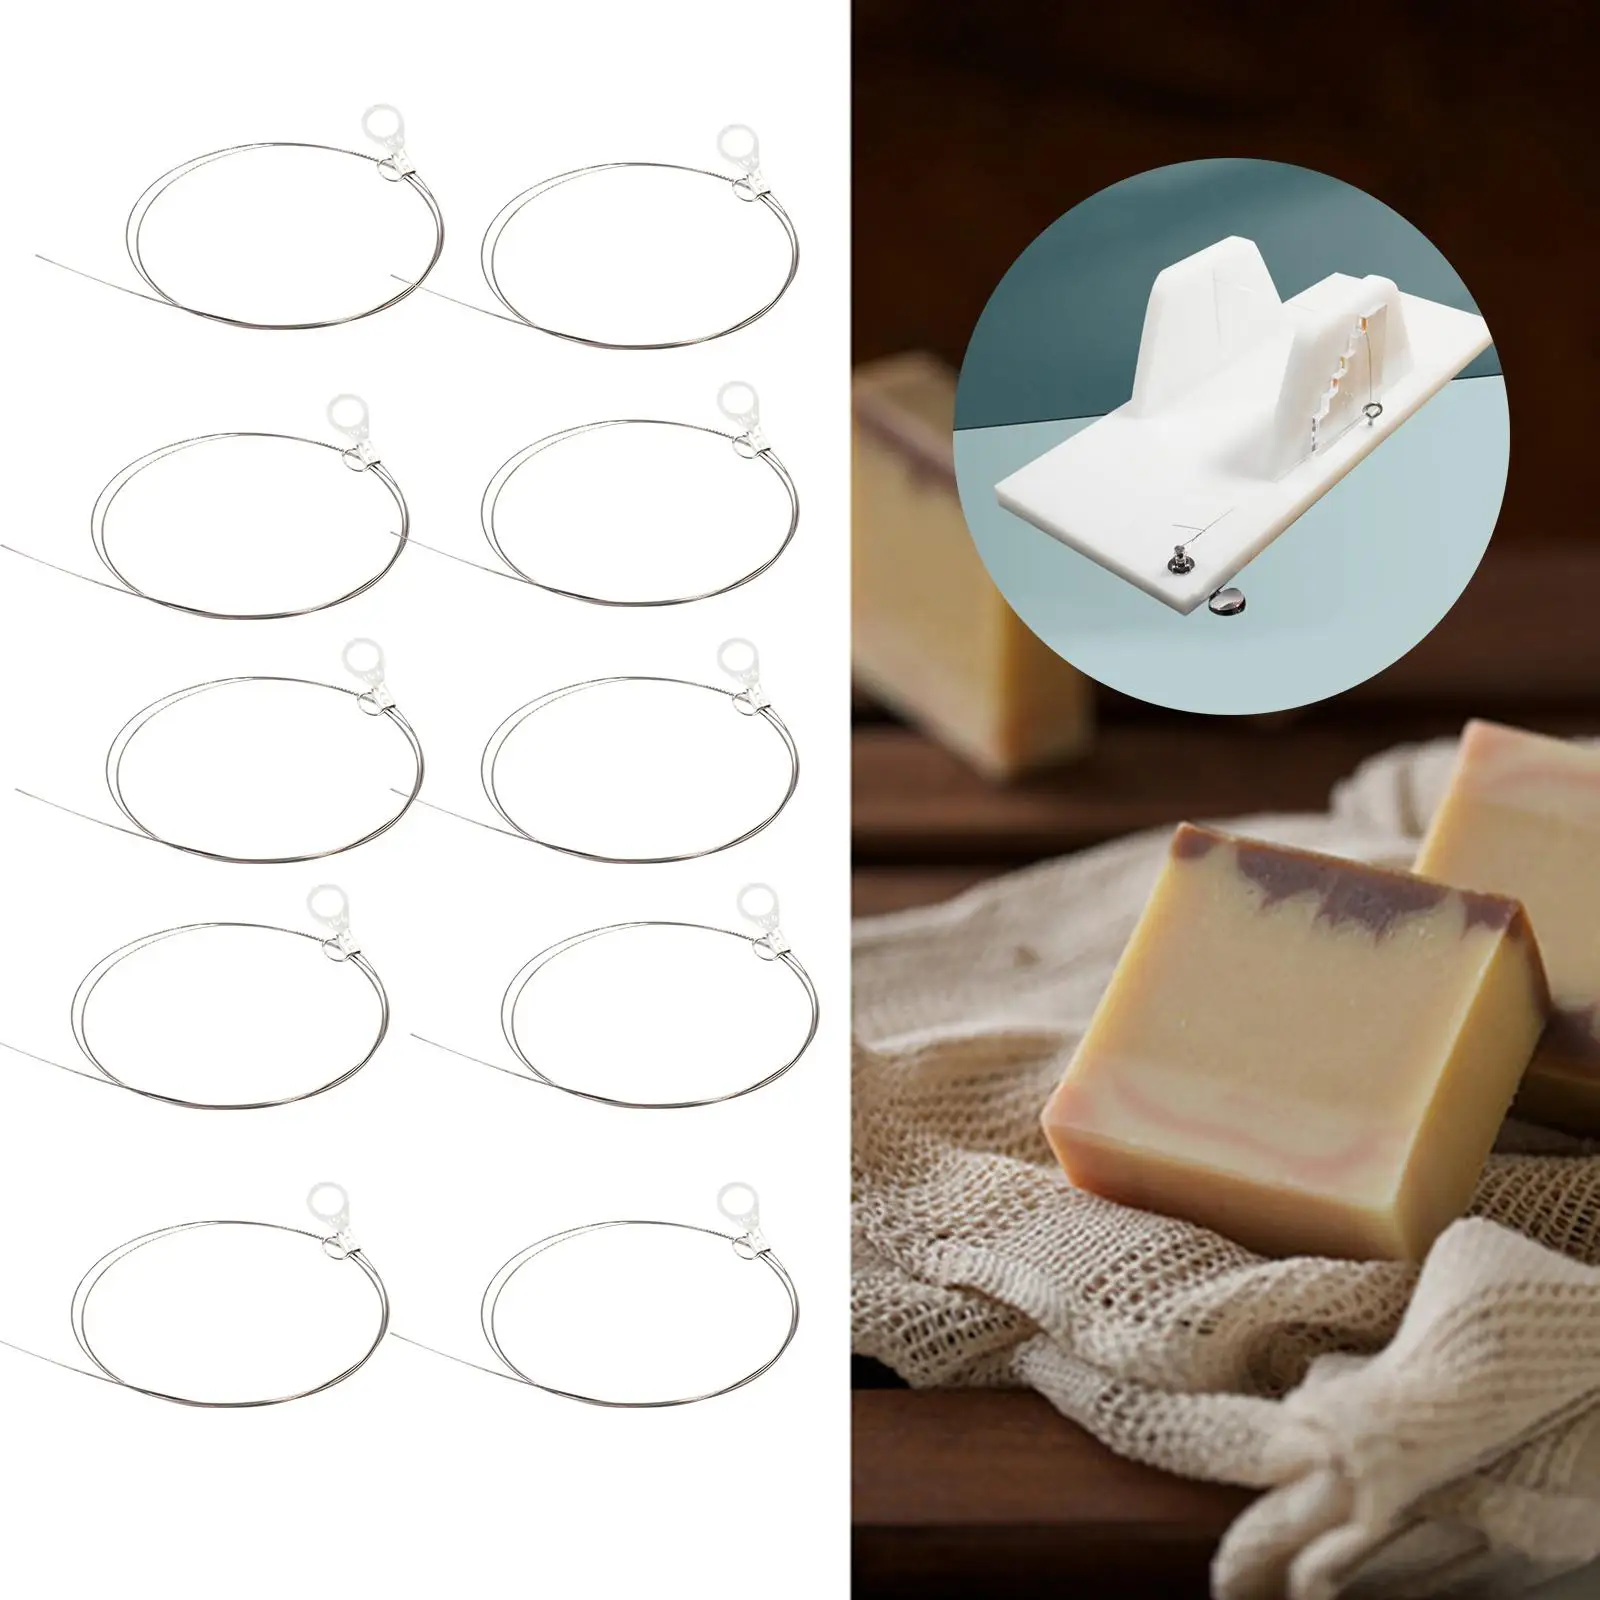 Soap Cutter Wires Cutting Soap for Cutting Chocolate, Butter Soap Cutter Sturdy Soap Cutter Adjustable Replacement Wires